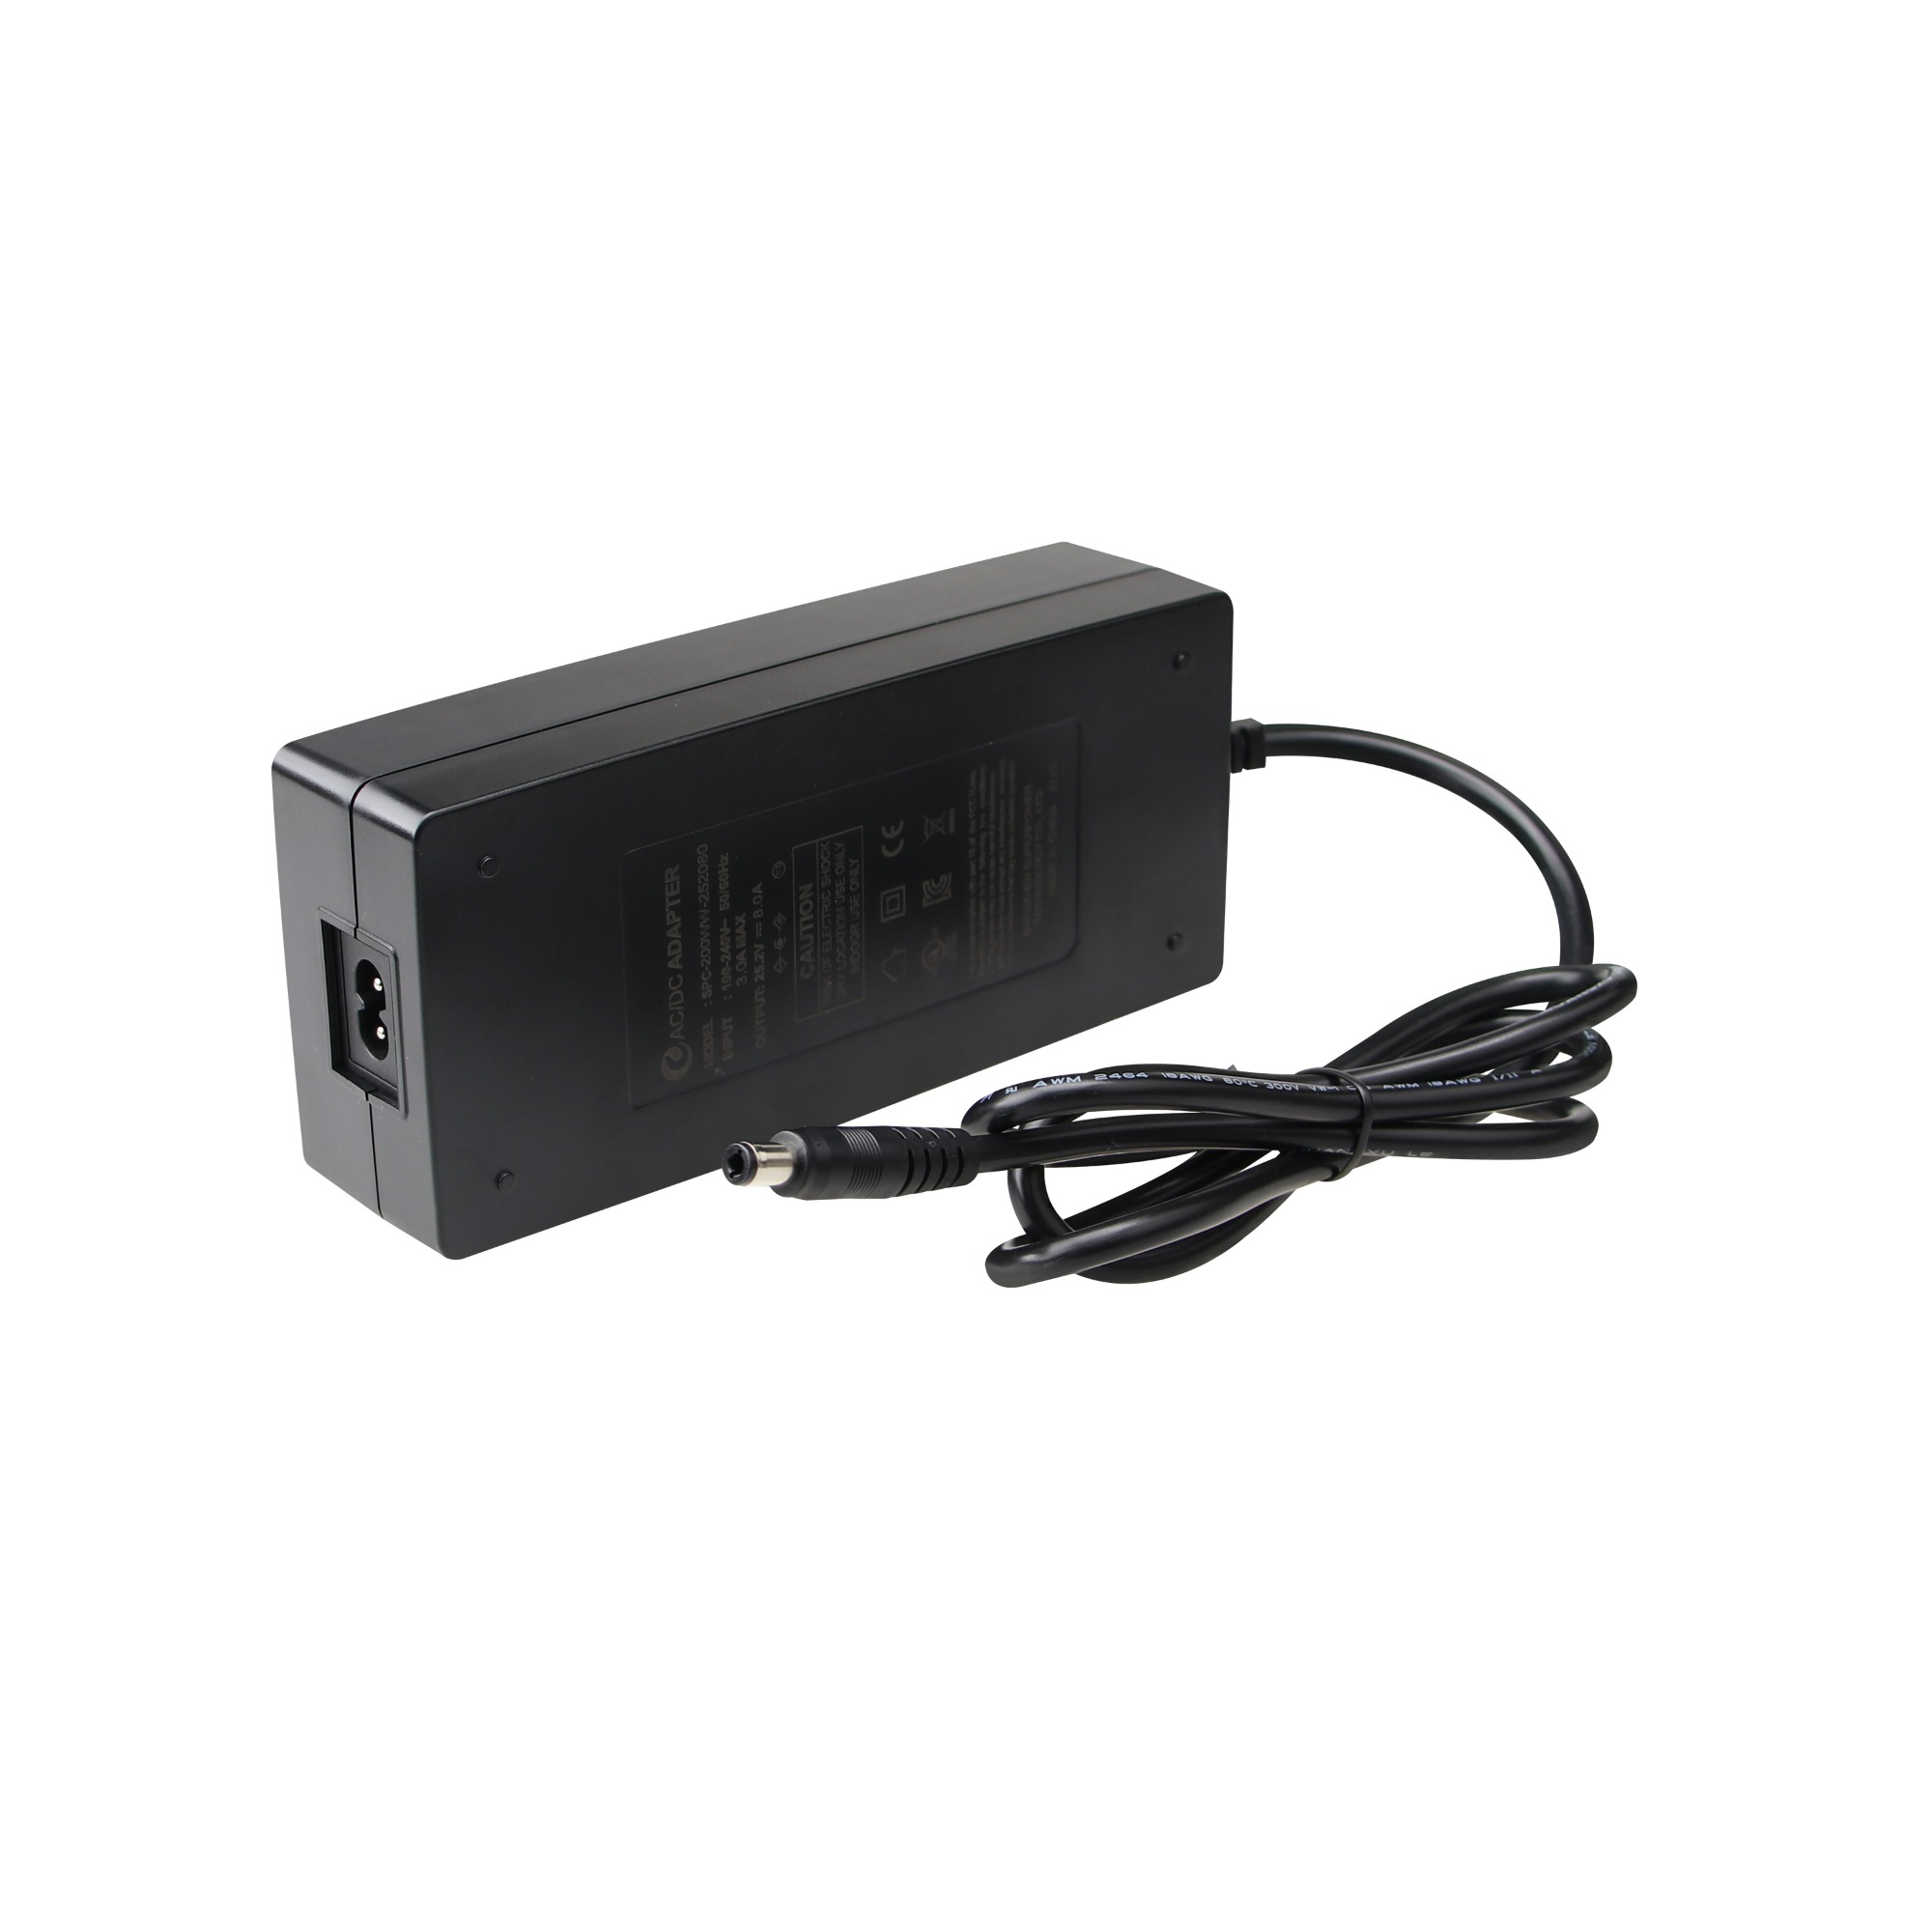 Smart charger 14.6V 6A LiFePO4 battery charger For 12V 4S LiFePO4 Battery charger Electric Scooter E-bike motorcycle